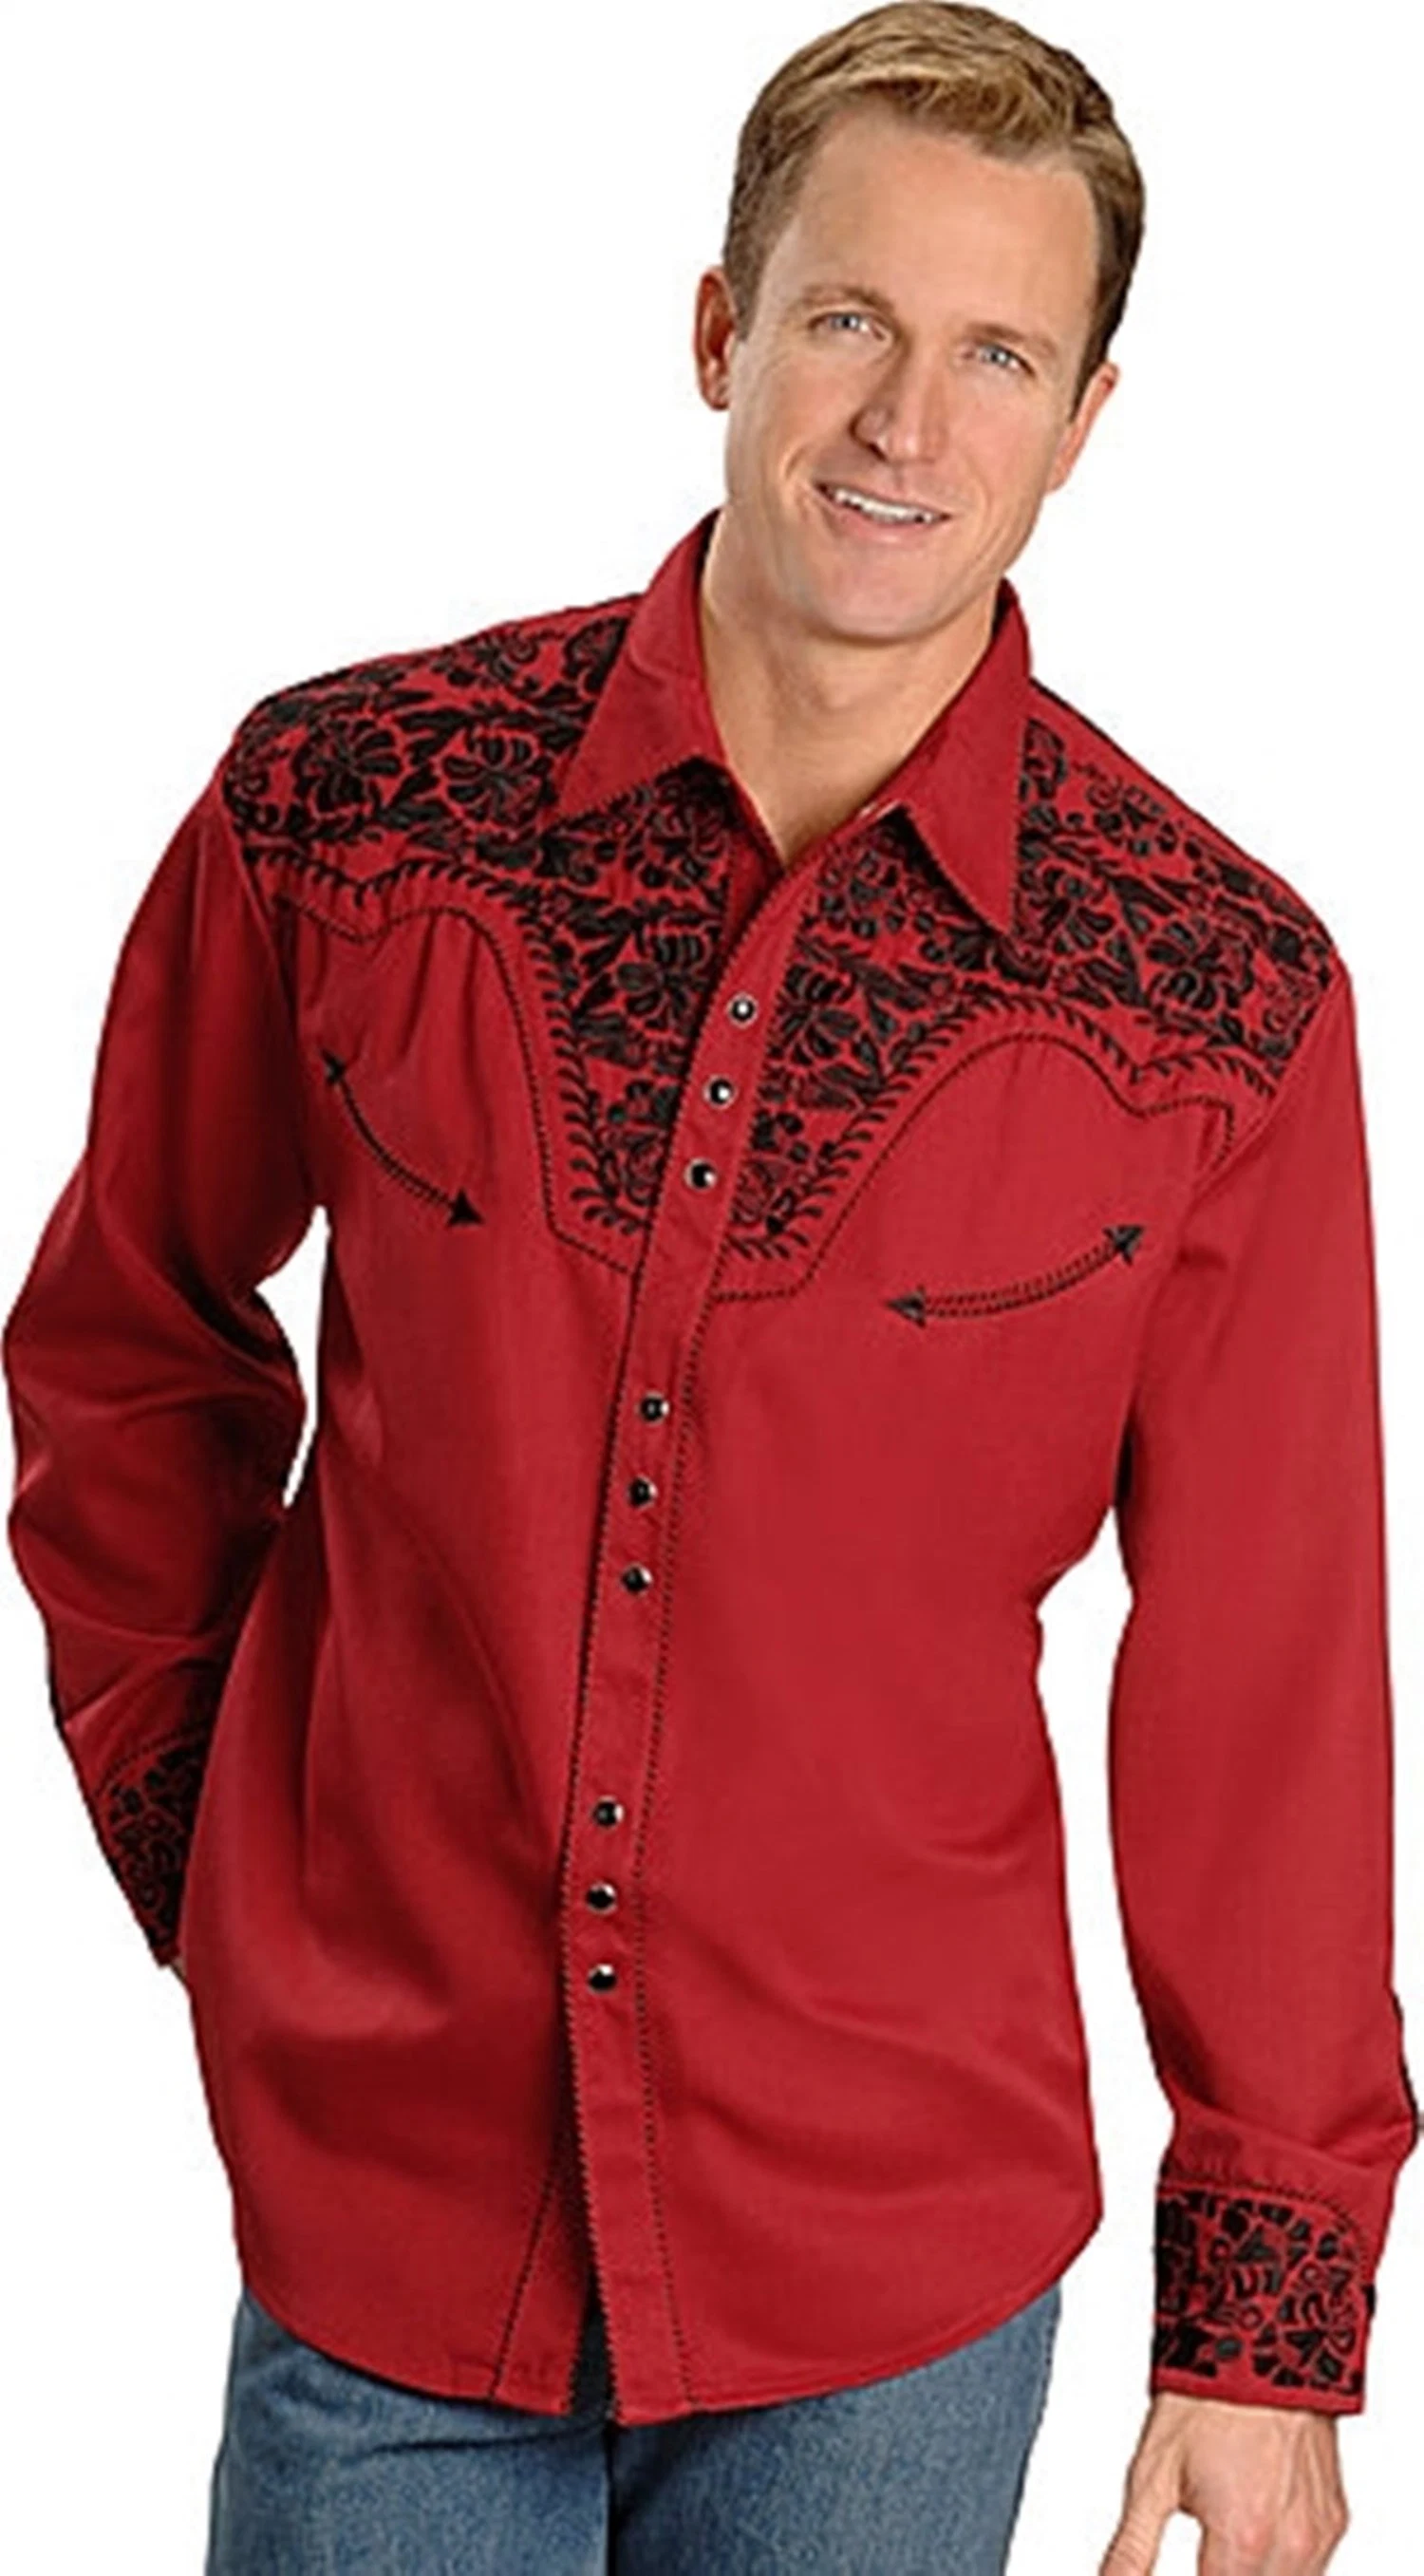 Wholesale Boutique Men&prime; S Embroidered Western Cowboy Red Clothing, Men&prime; S Woven Shirts, Men&prime; S Top, Men&prime; S Clothing, Woven Shirts